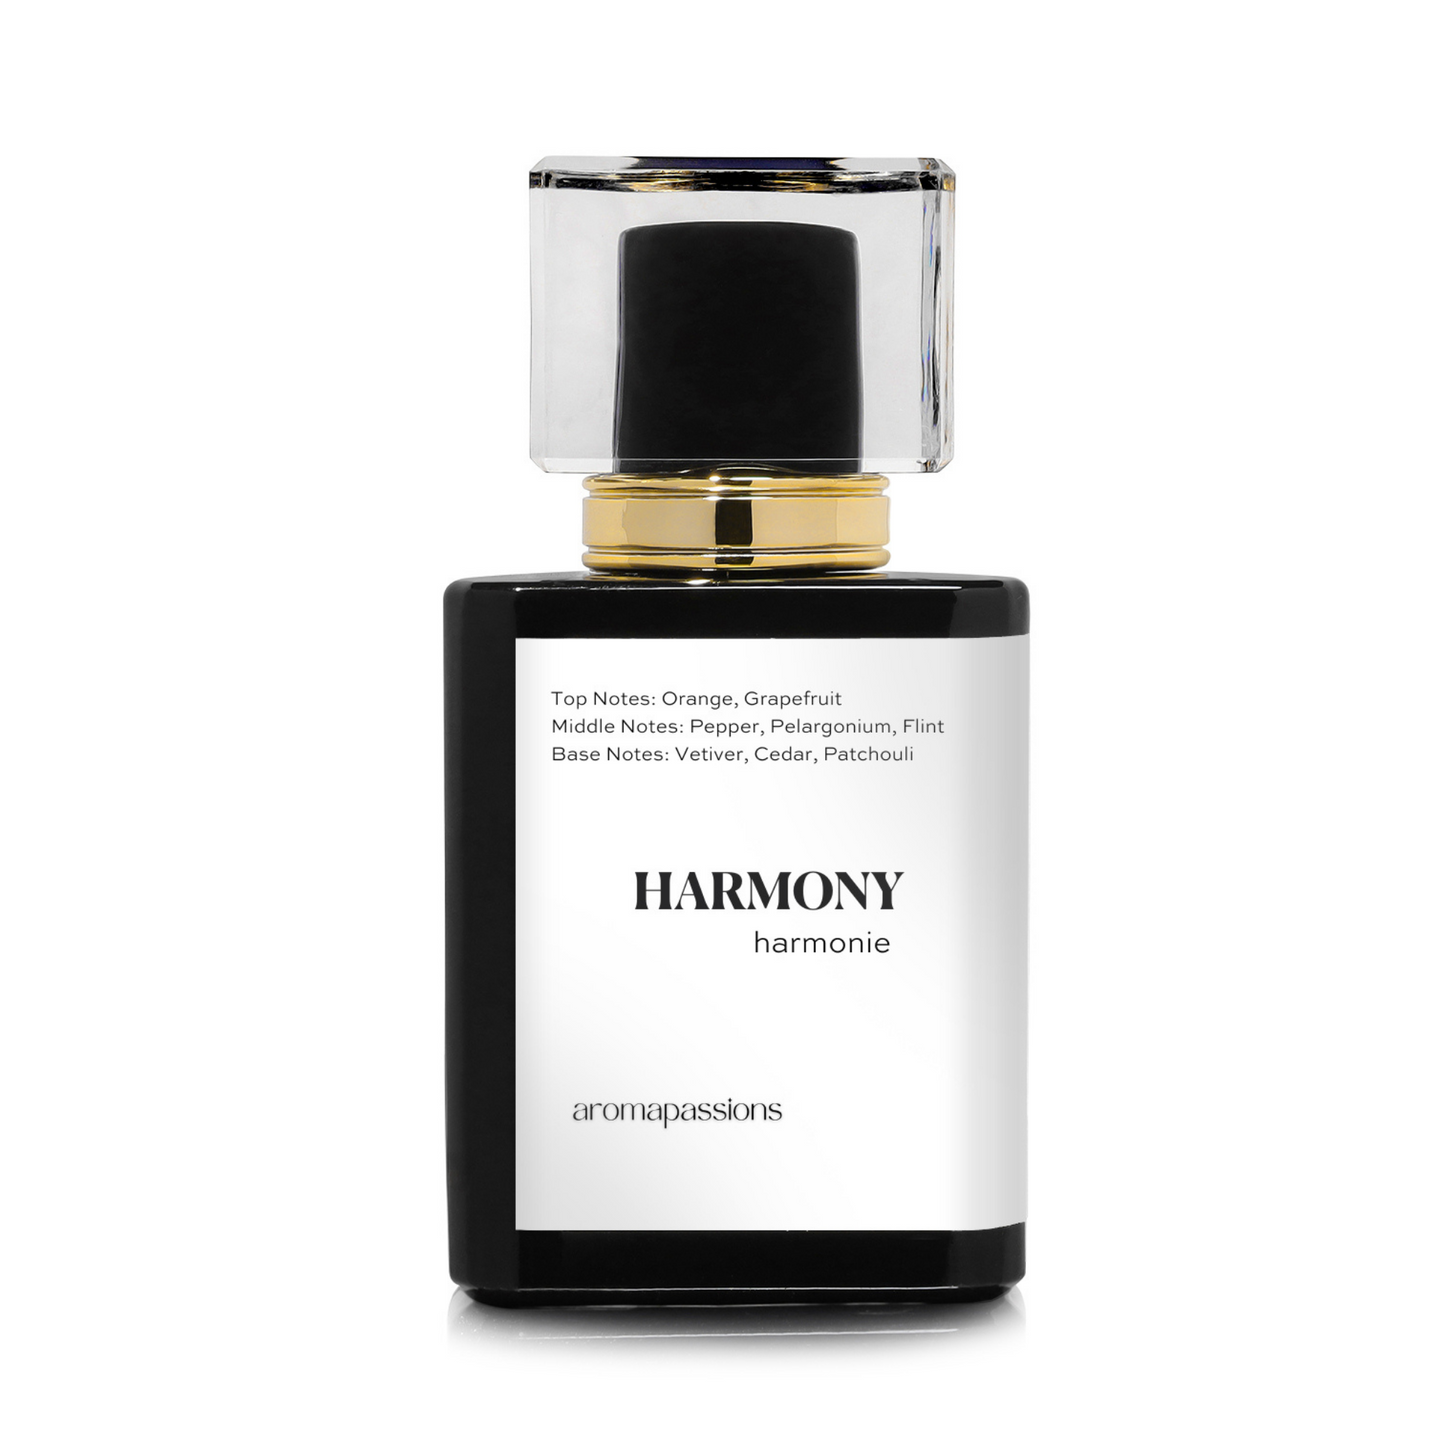 HARMONY | Inspired by HRMS TERRE D'HERMES | Pheromone Perfume Dupes